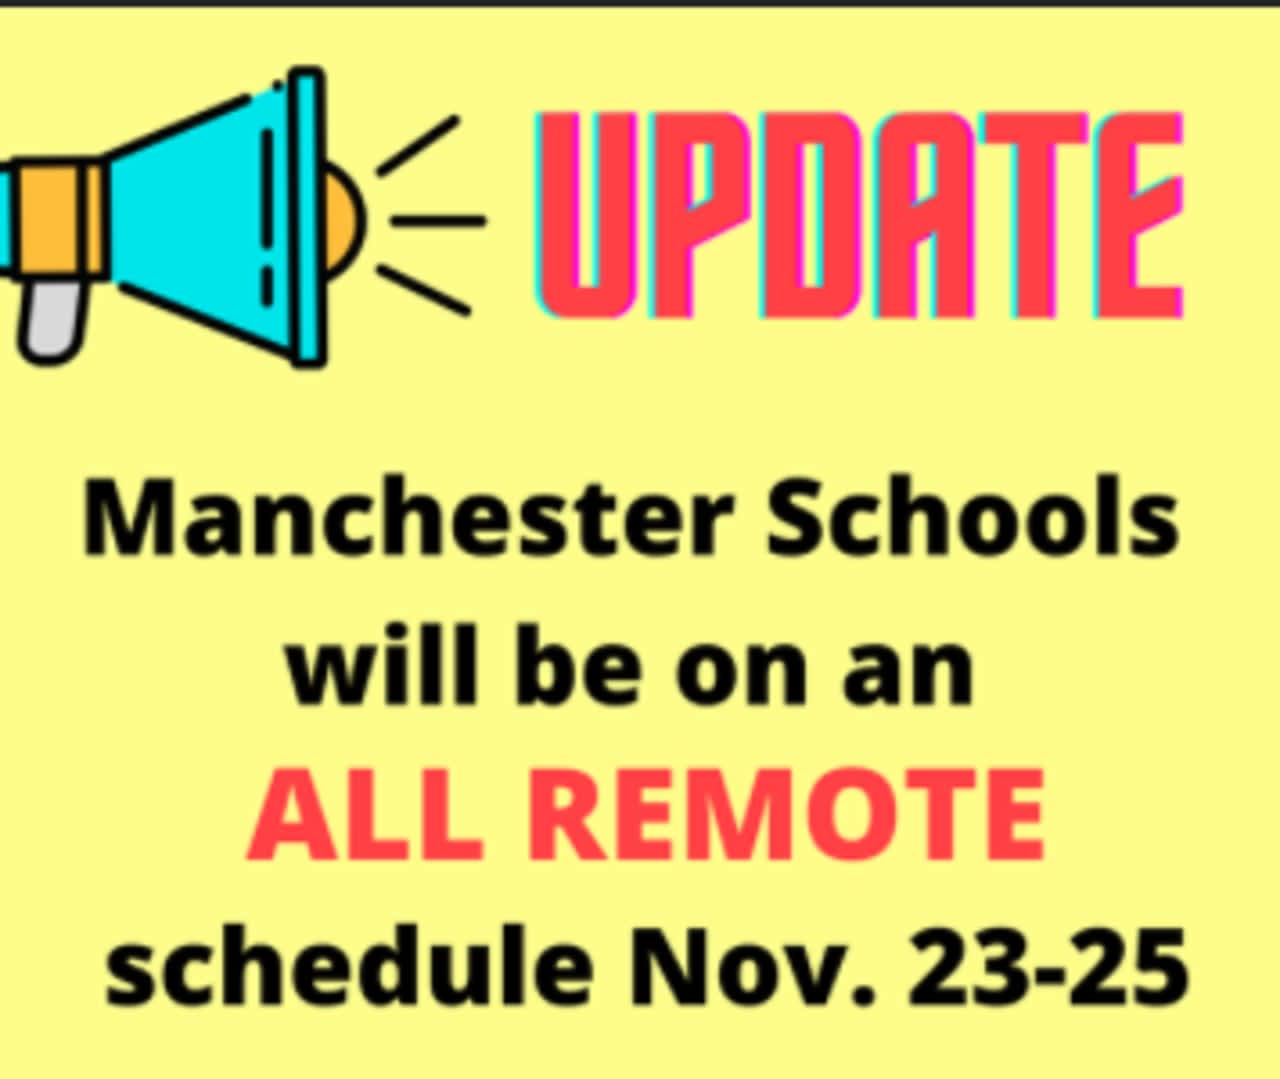 Manchester Schools returned to all-remote learning this week due to an increase in positive COVID-19 cases.